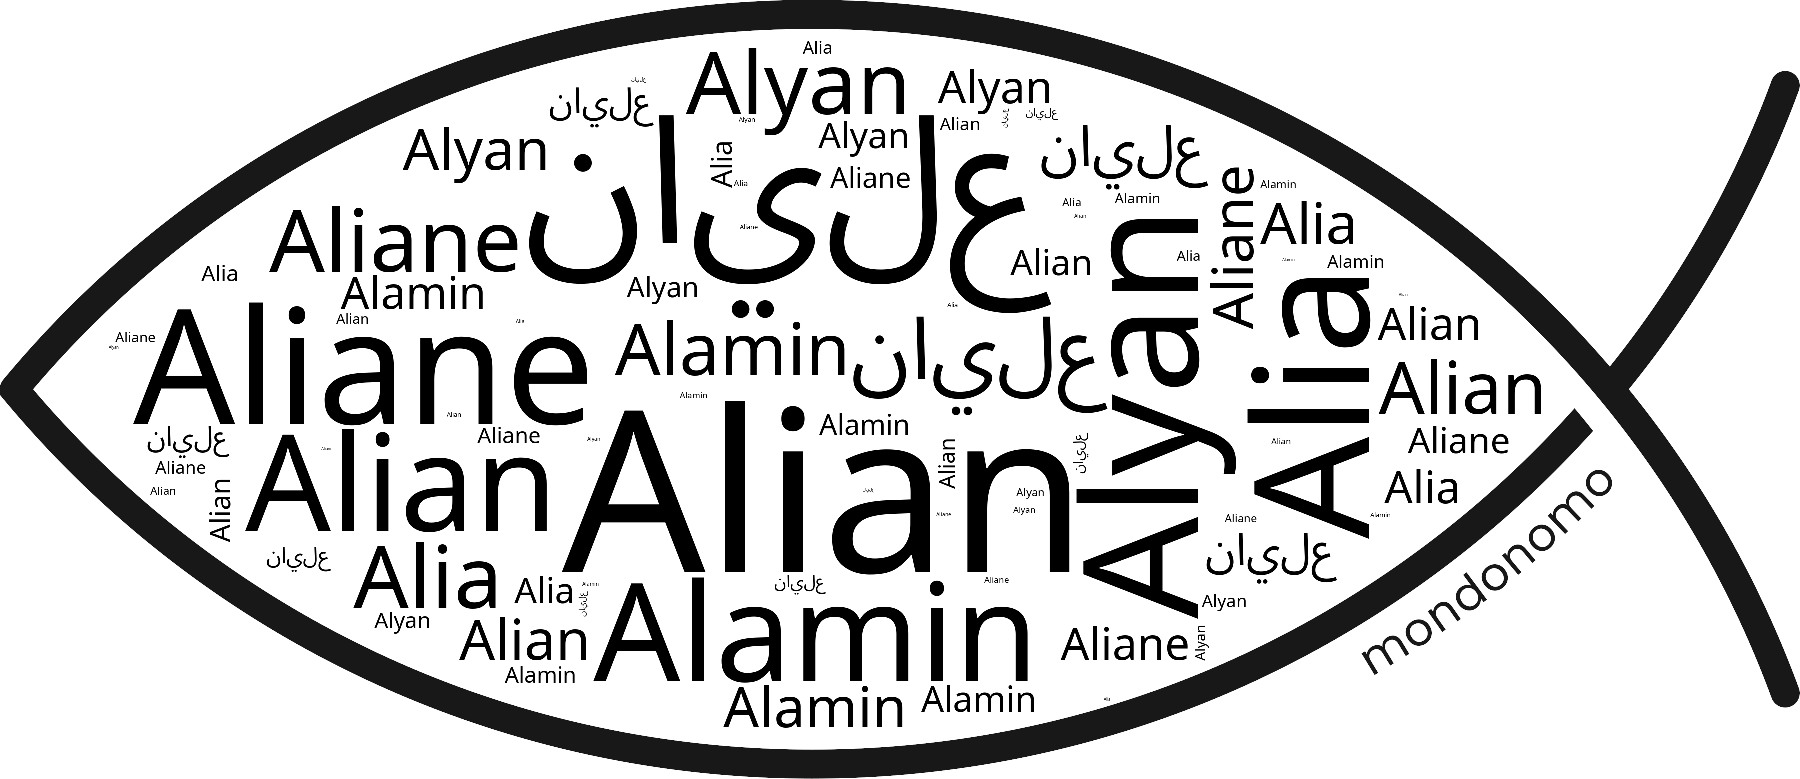 Name Alian in the world's Bibles